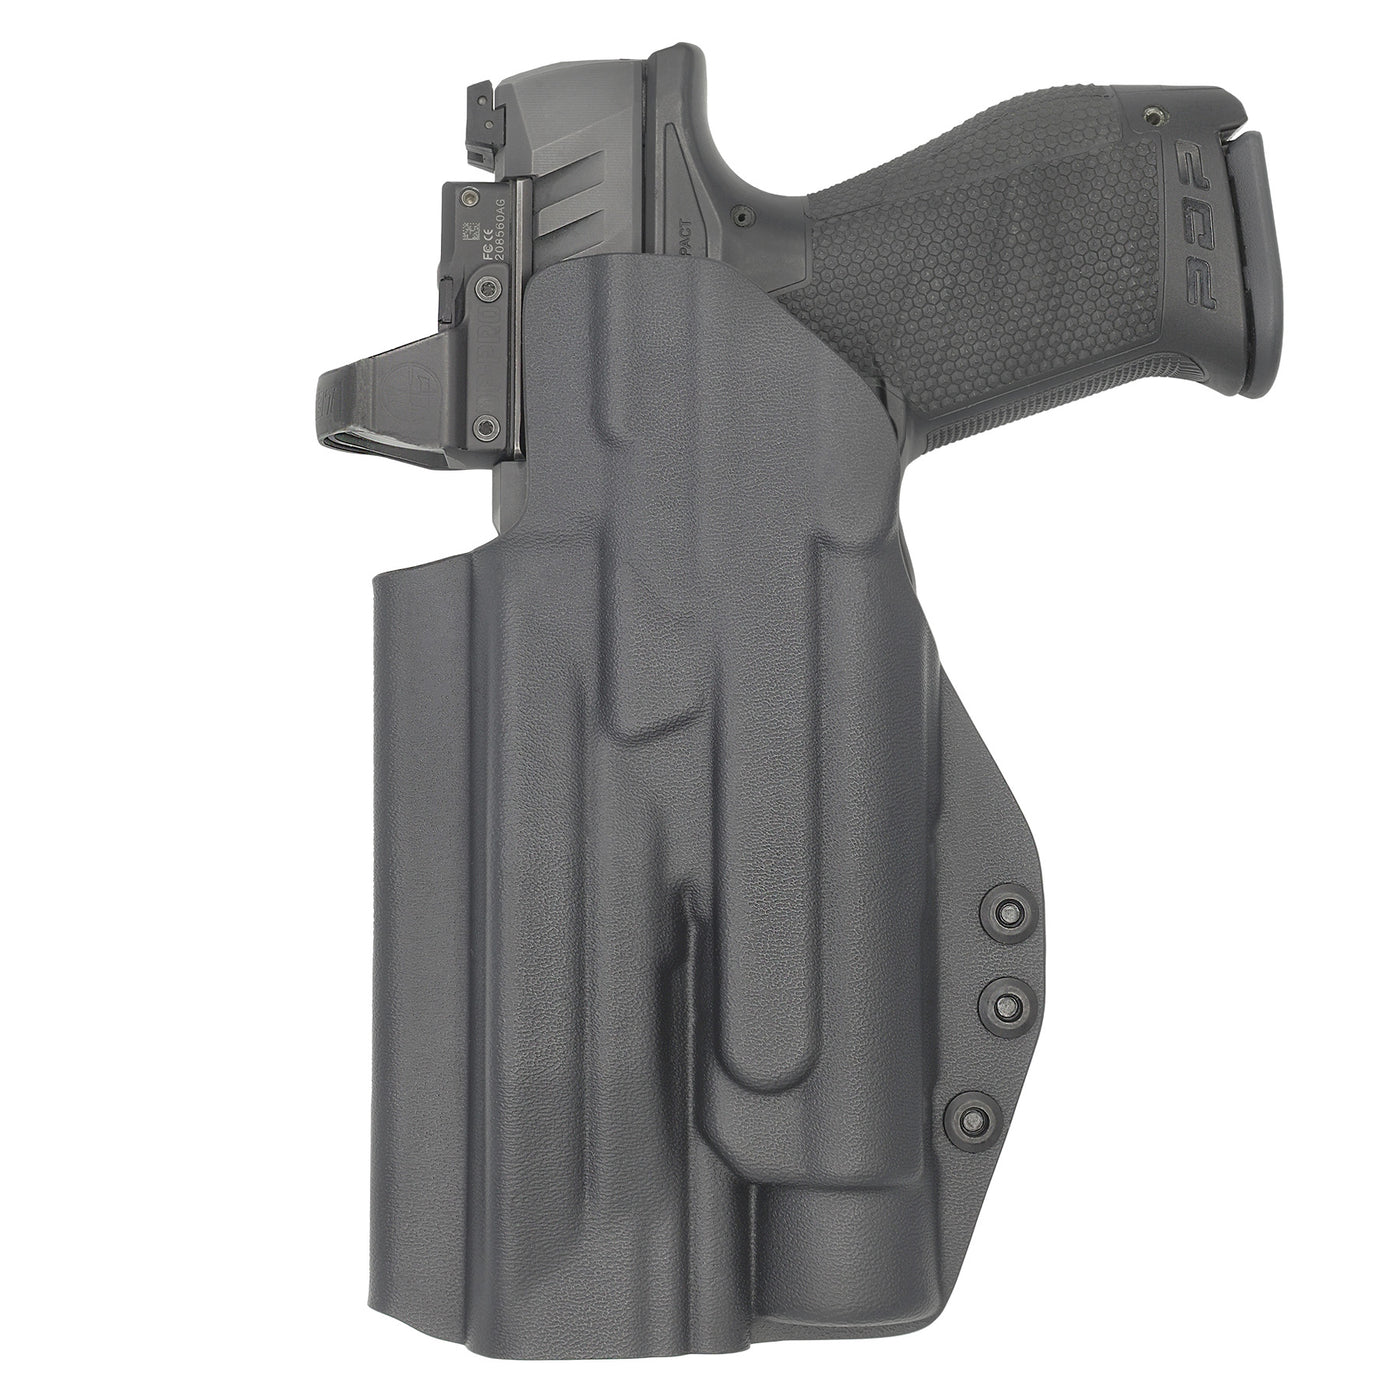 C&G Holsters Quickship IWB Tactical Beretta Streamlight TLR-1 in holstered position back view